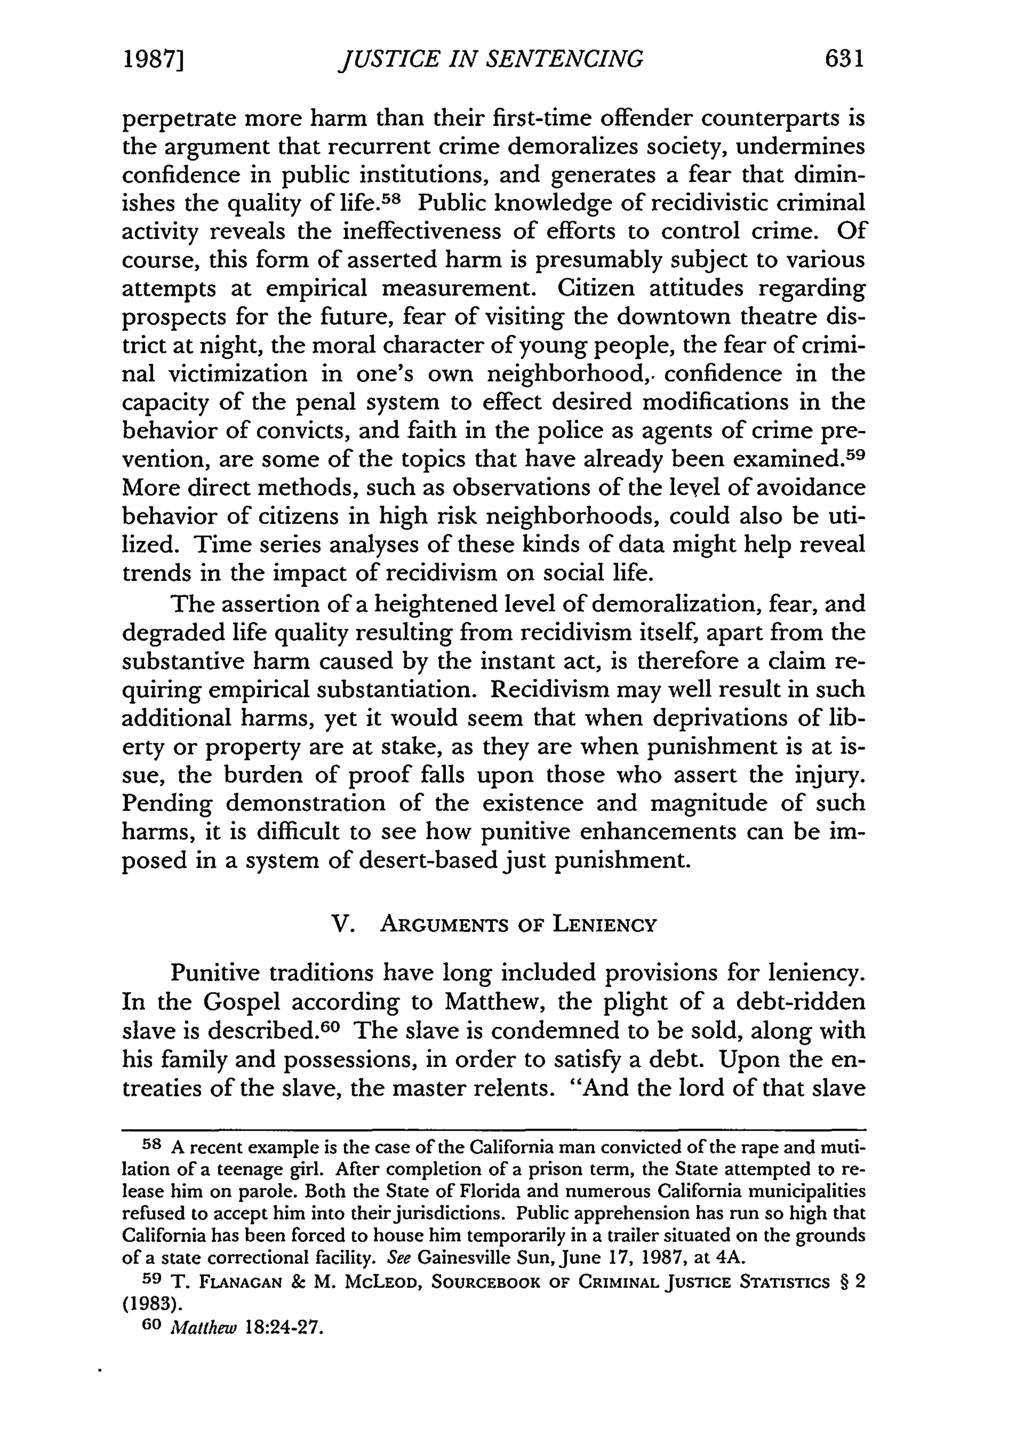 1987] JUSTICE IN SENTENCING perpetrate more harm than their first-time offender counterparts is the argument that recurrent crime demoralizes society, undermines confidence in public institutions,